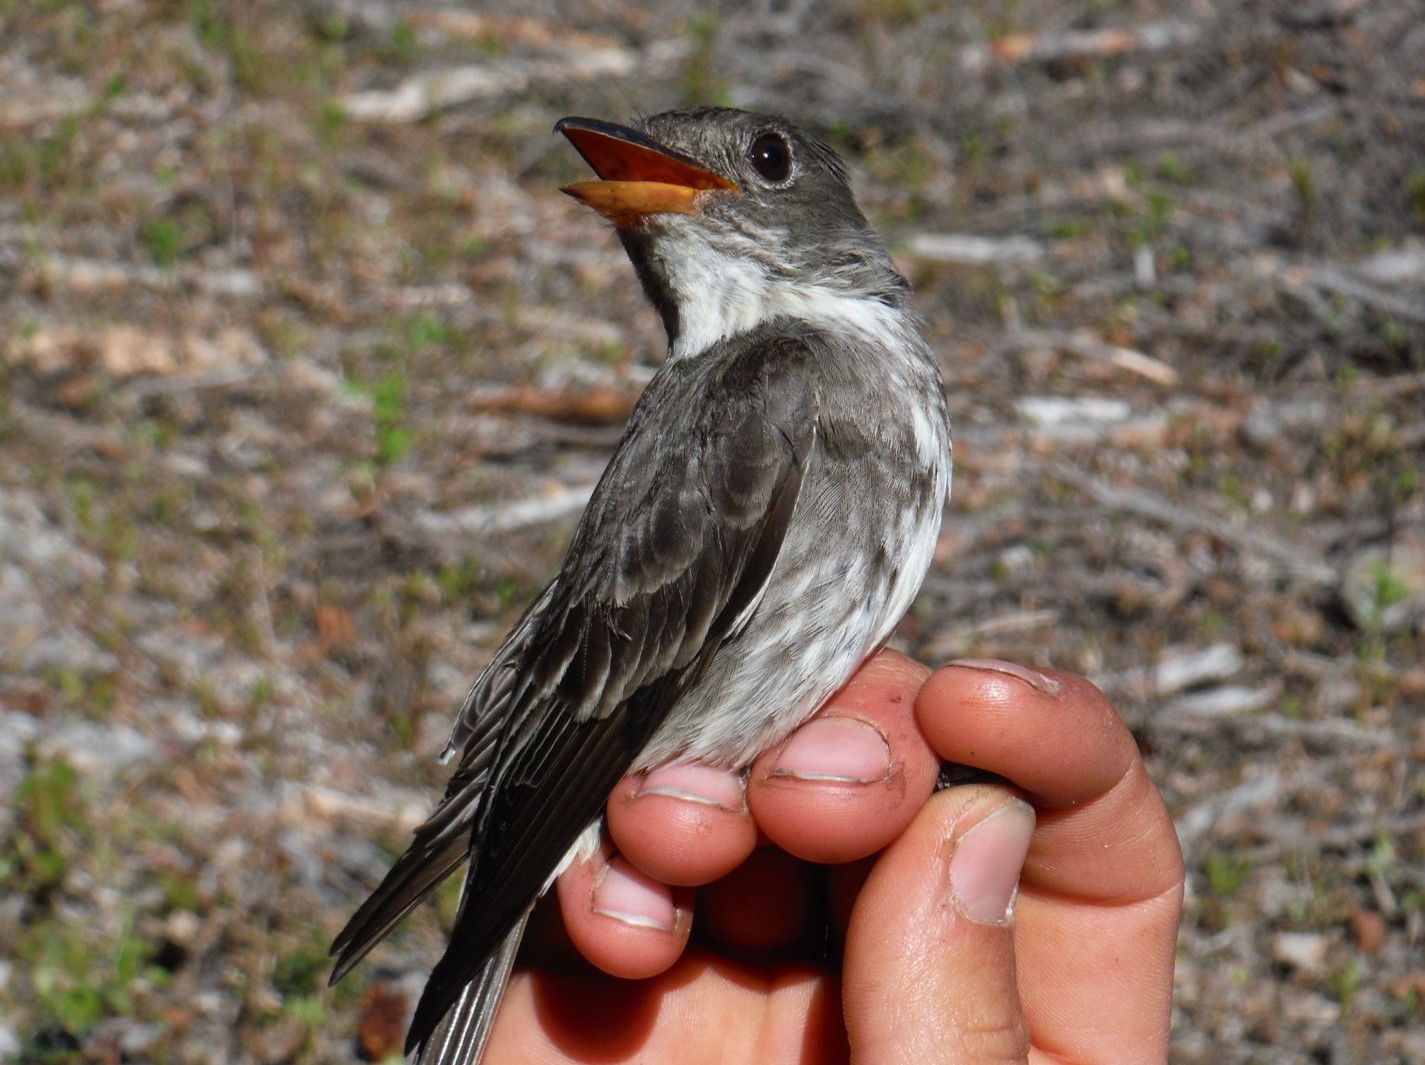 Olive-sided Flycatcher in the hand (Photo: J. Hagelin, ADFG) - Alaska Department of Fish and Game (ADFG)